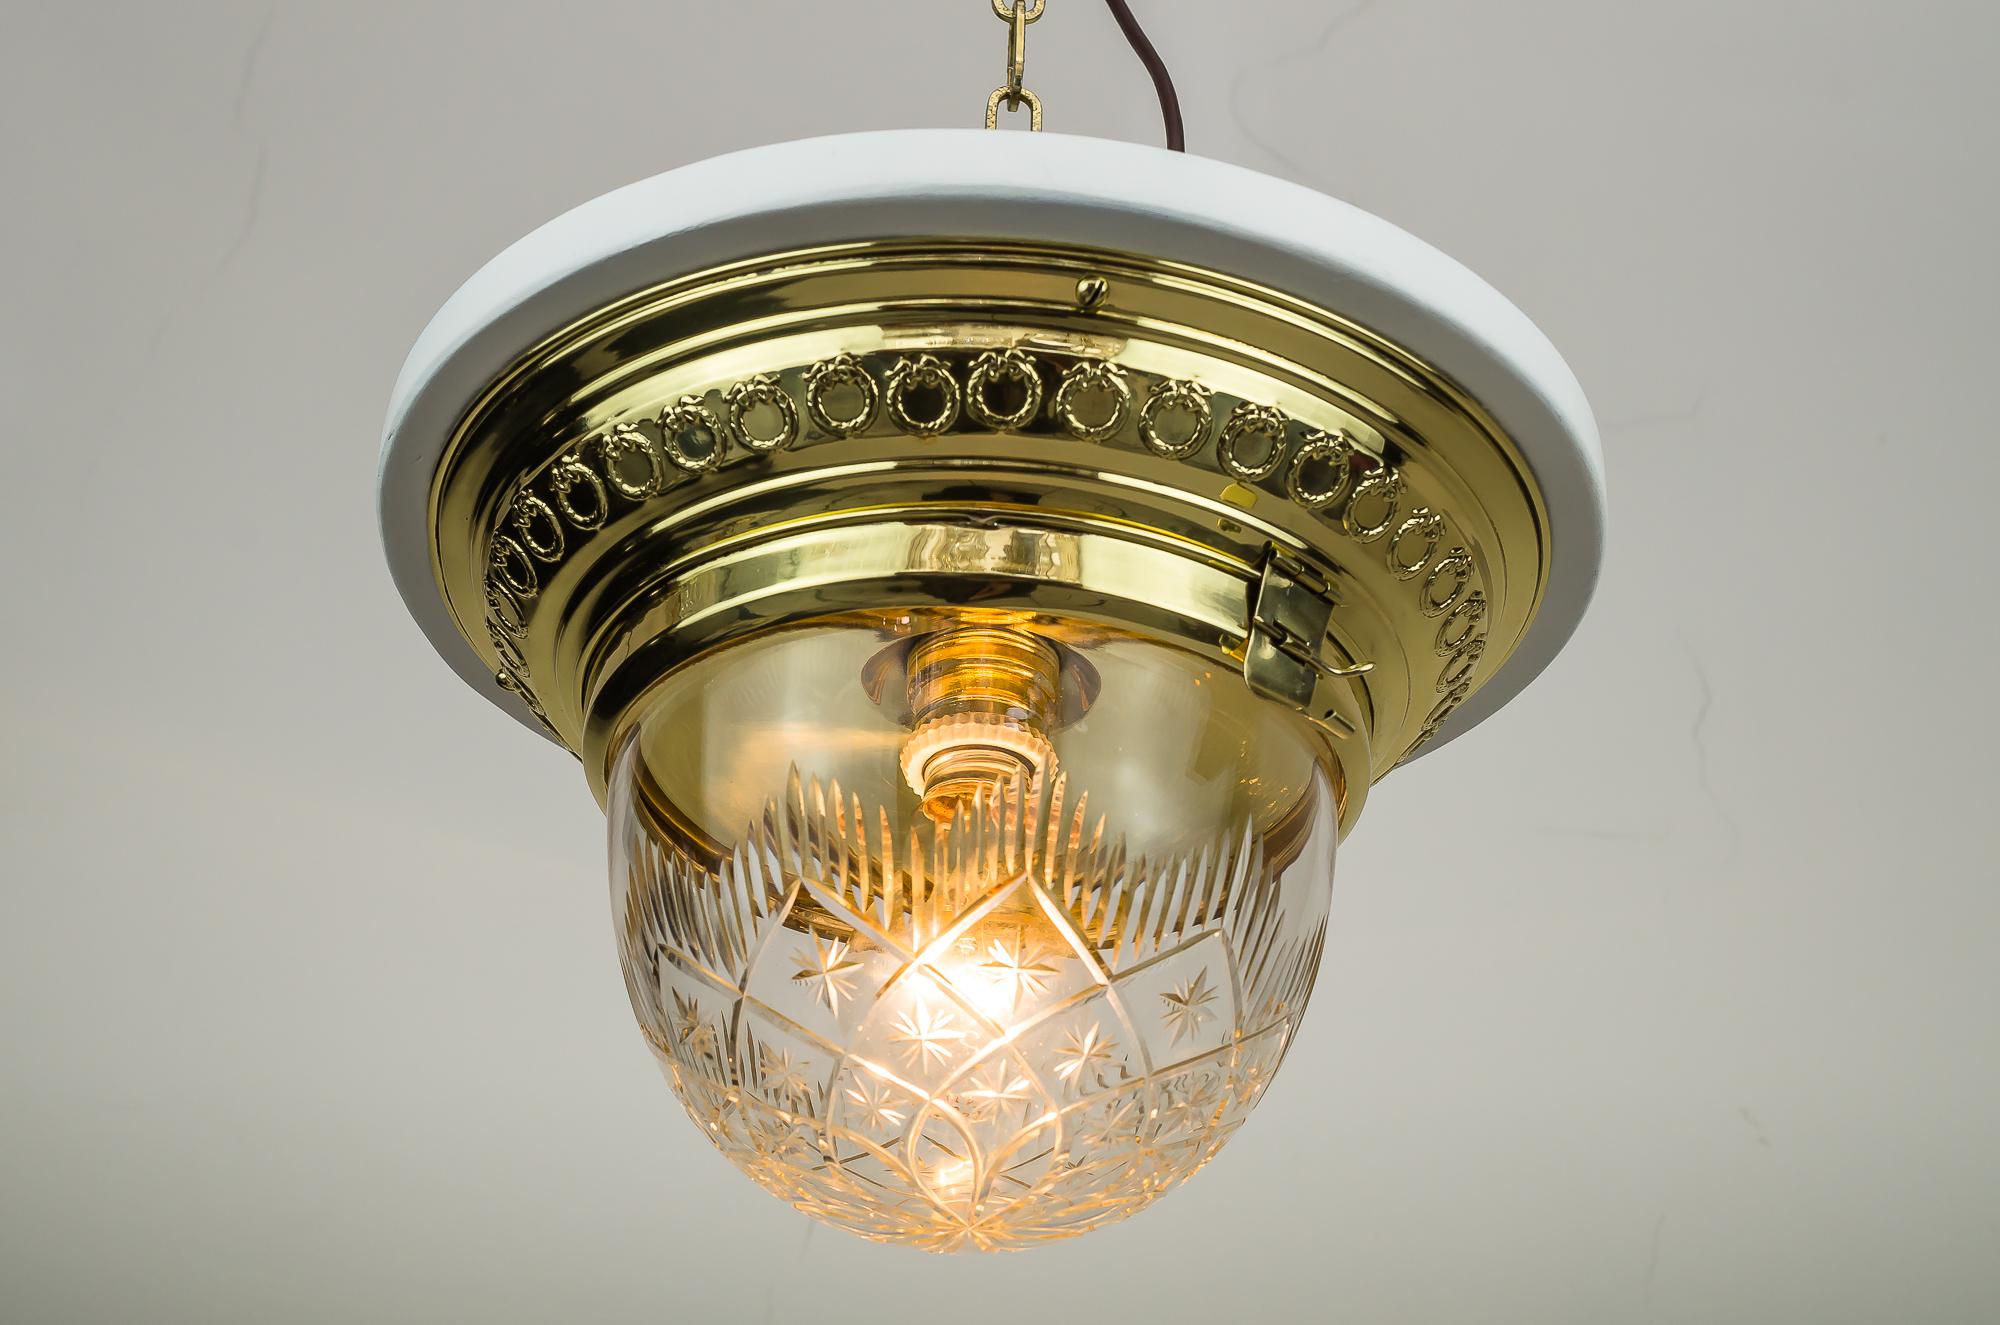 Early 20th Century Jugendstil Ceiling Lamps 1906 with Original Glass and Painted Wood Plate